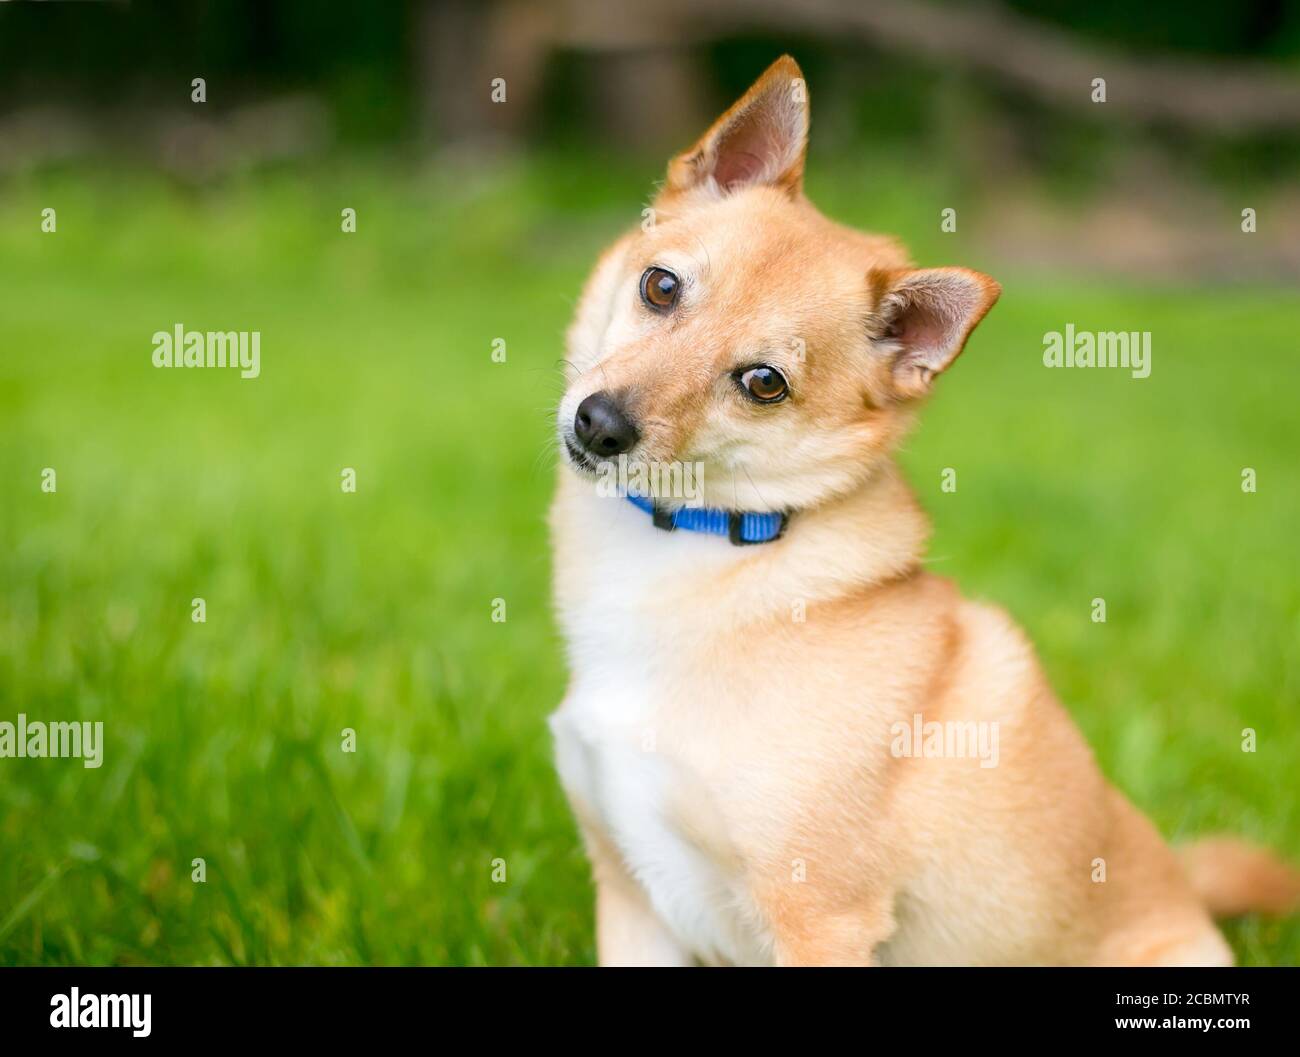 A Shiba Inu x Chihuahua mixed breed dog looking at the camera and listening with a head tilt Stock Photo